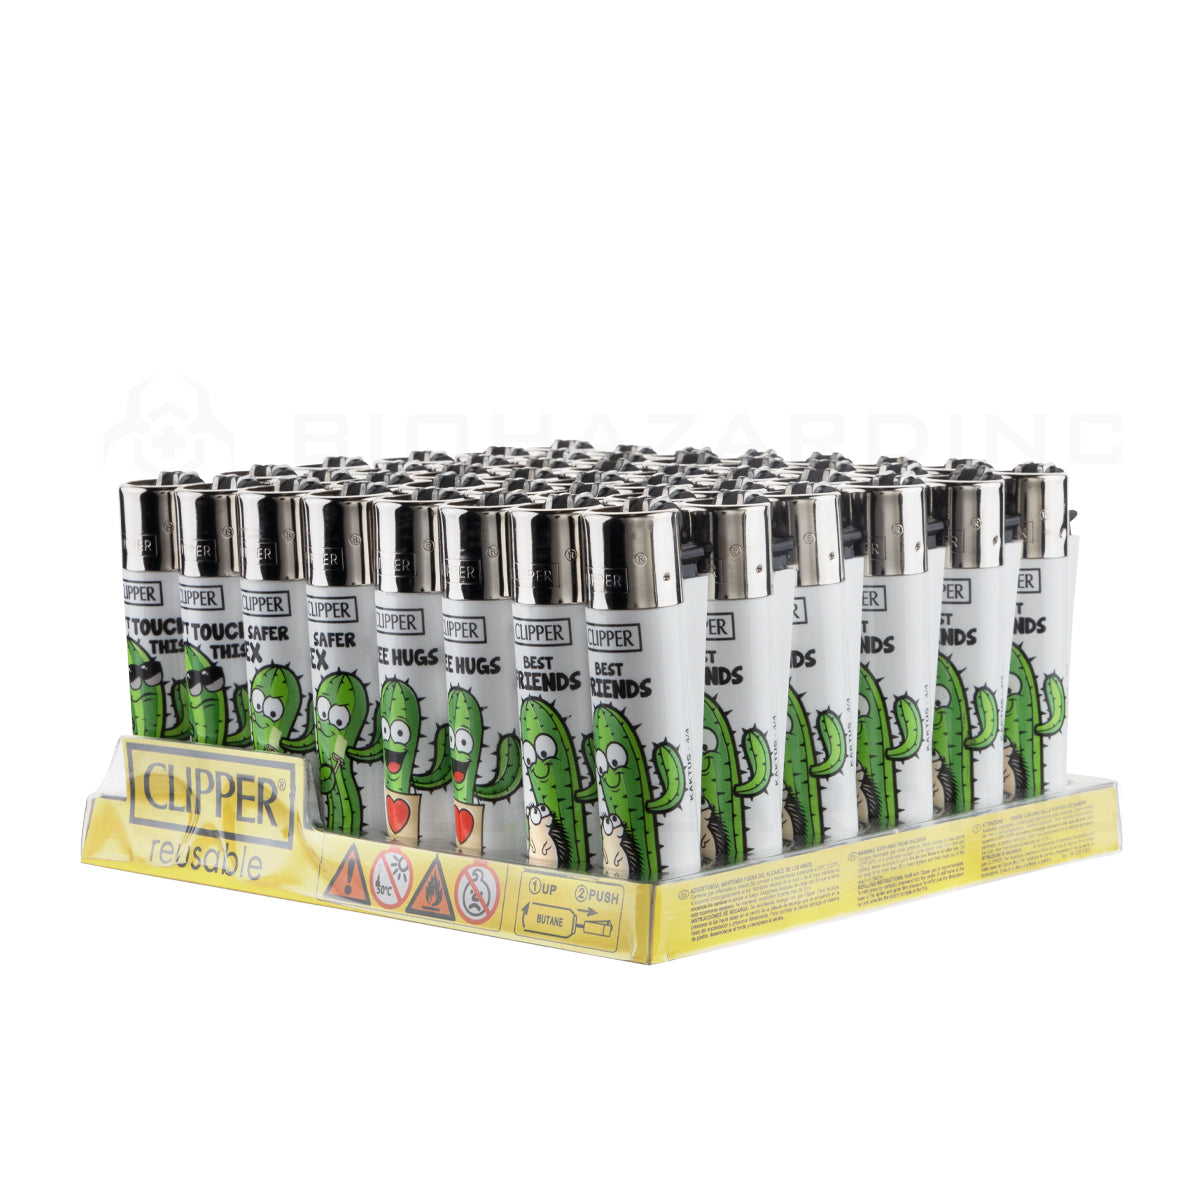 Clipper® | 'Retail Display' Cactus Designs Lighters | 48 Count Lighters Clipper   